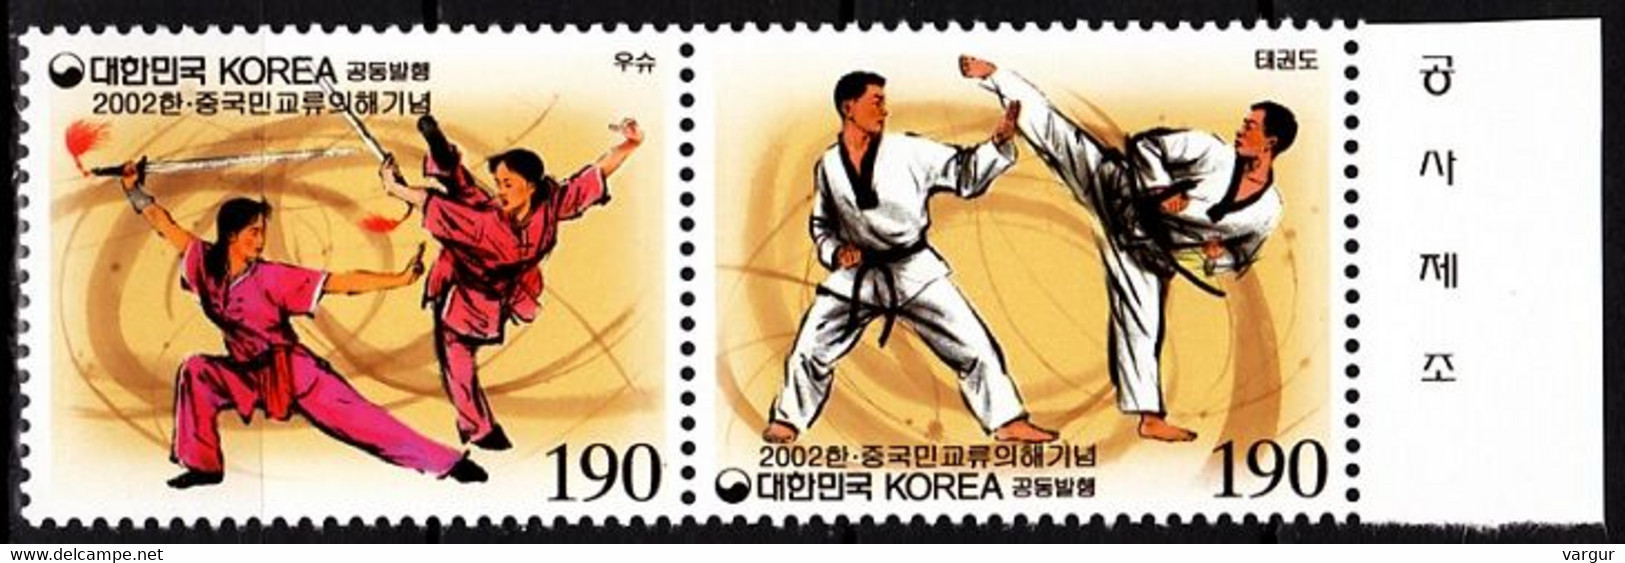 KOREA SOUTH 2002 Martial Sports: Teakwondo Kung-fu. Joint China. Pair, MNH - Joint Issues